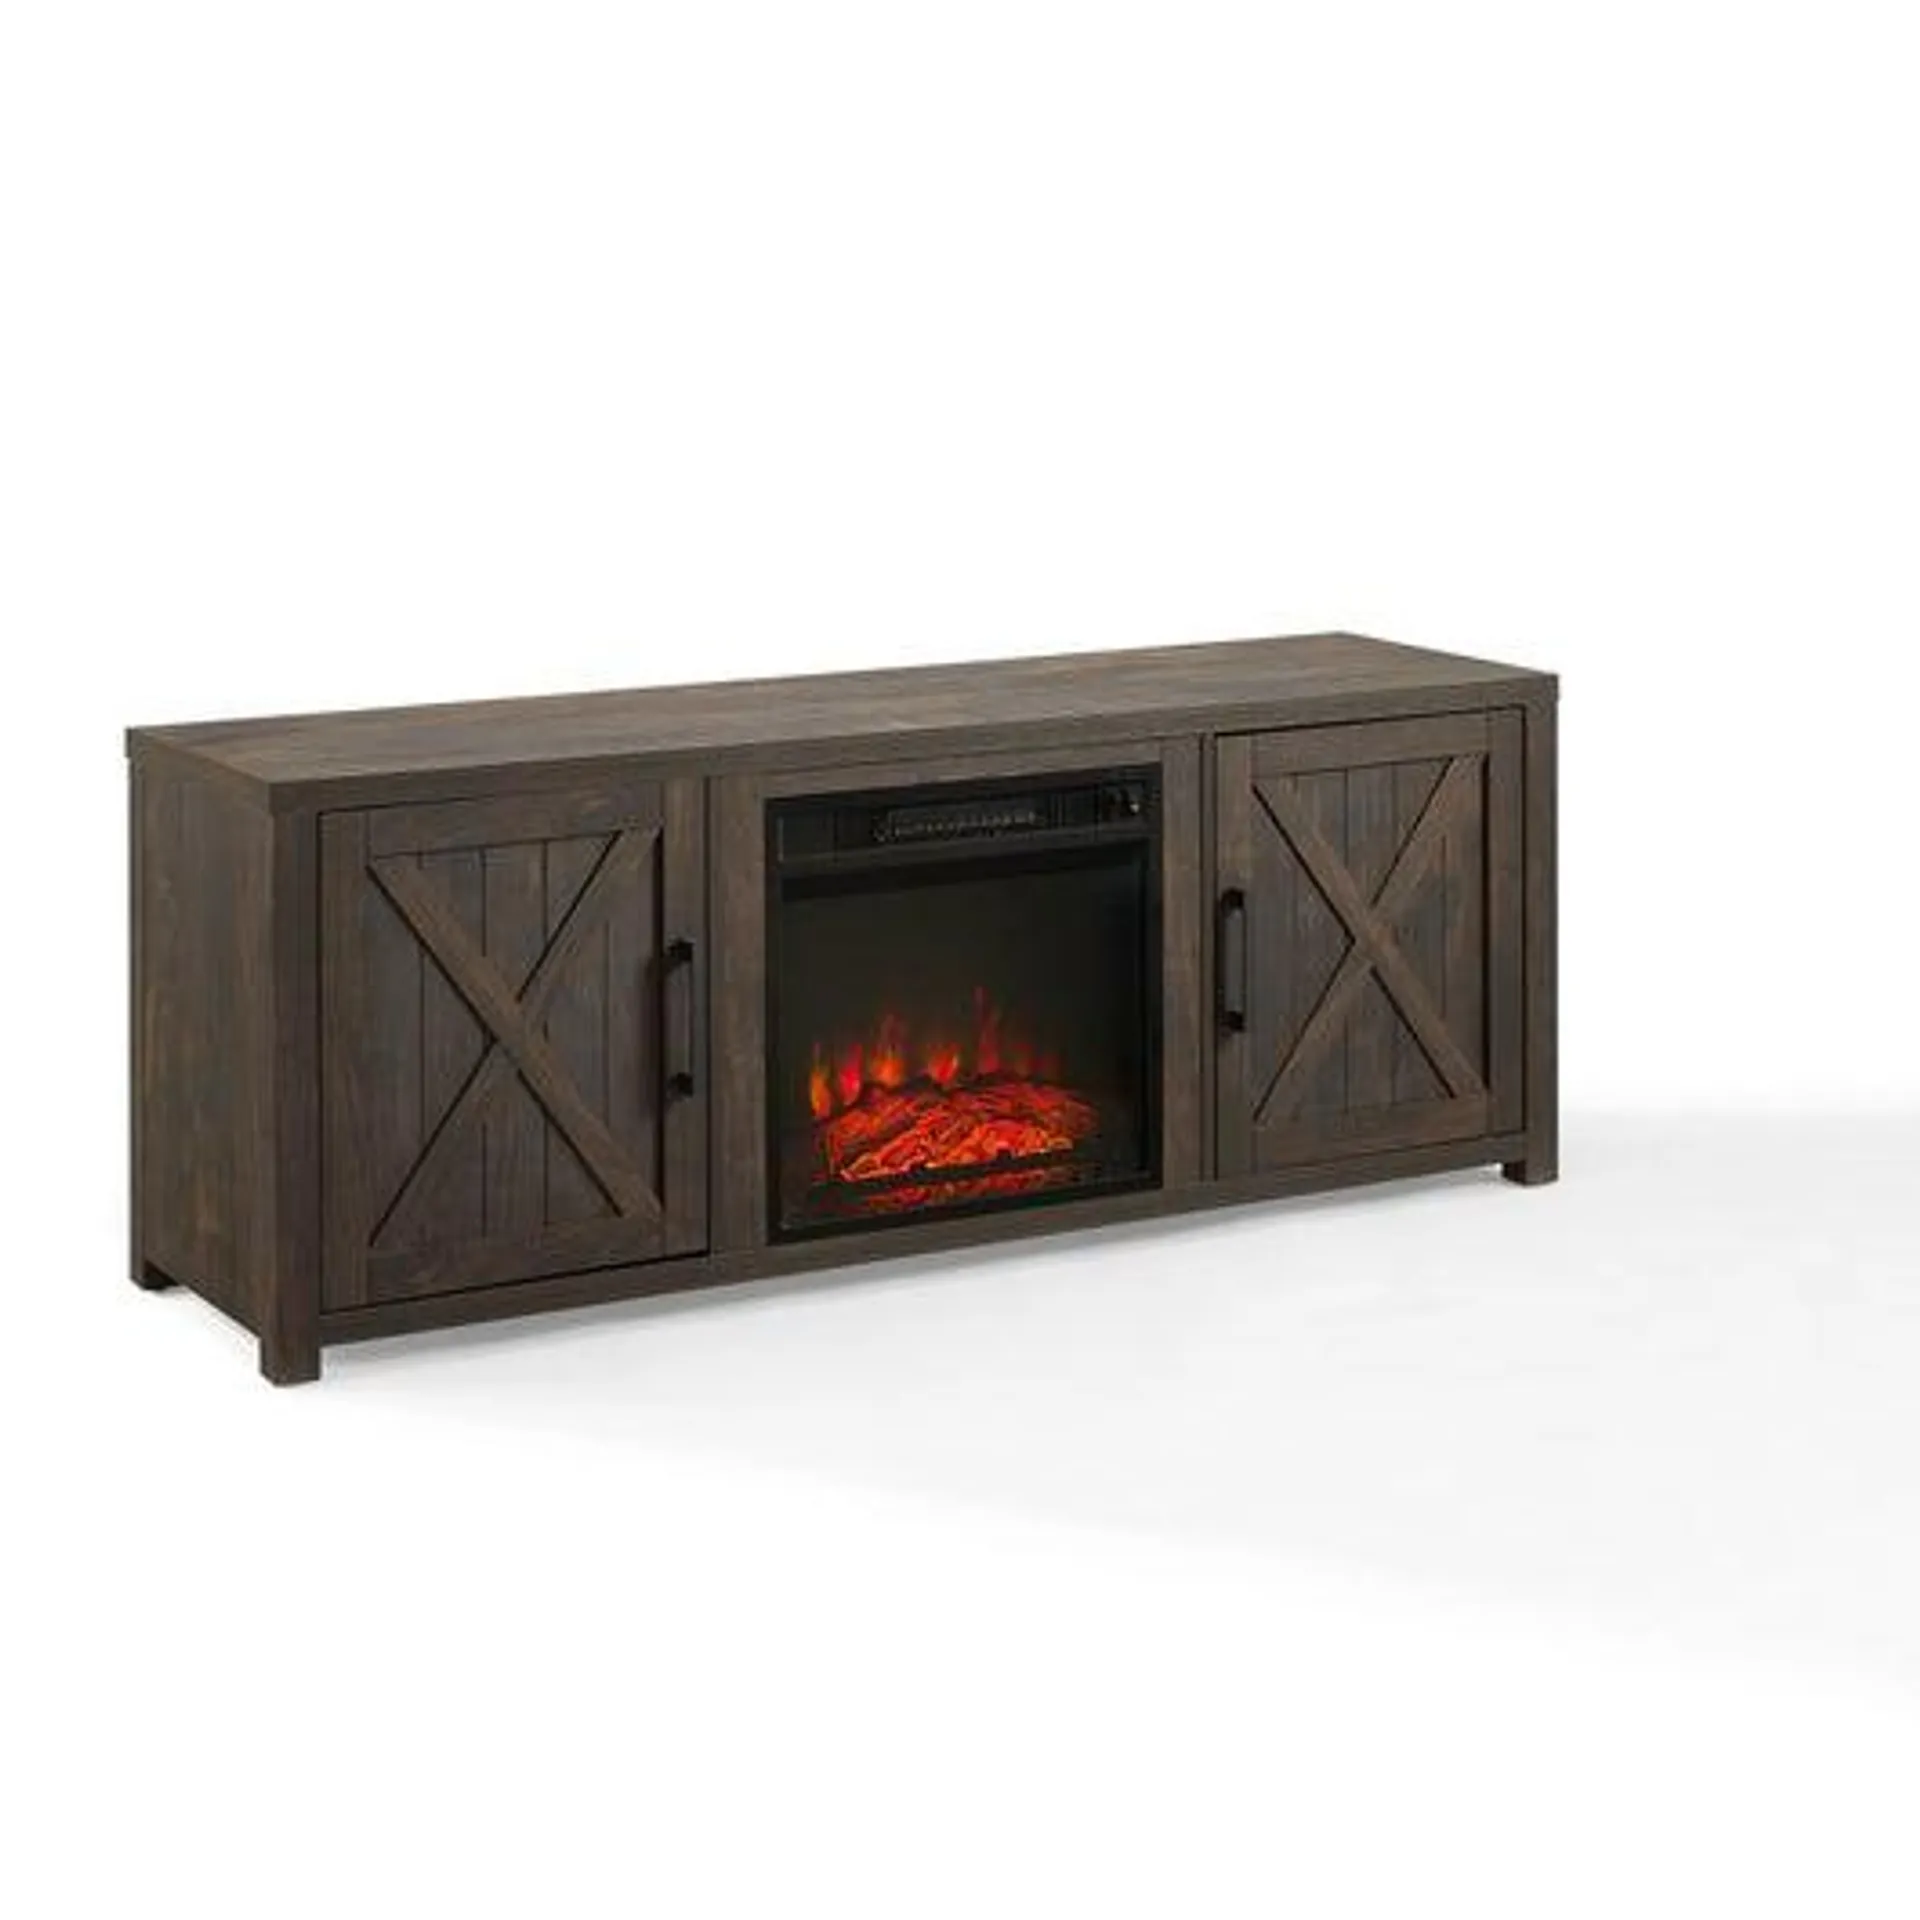 Gordon Low Profile Fireplace Tv Stand For 65+ Inch Tv